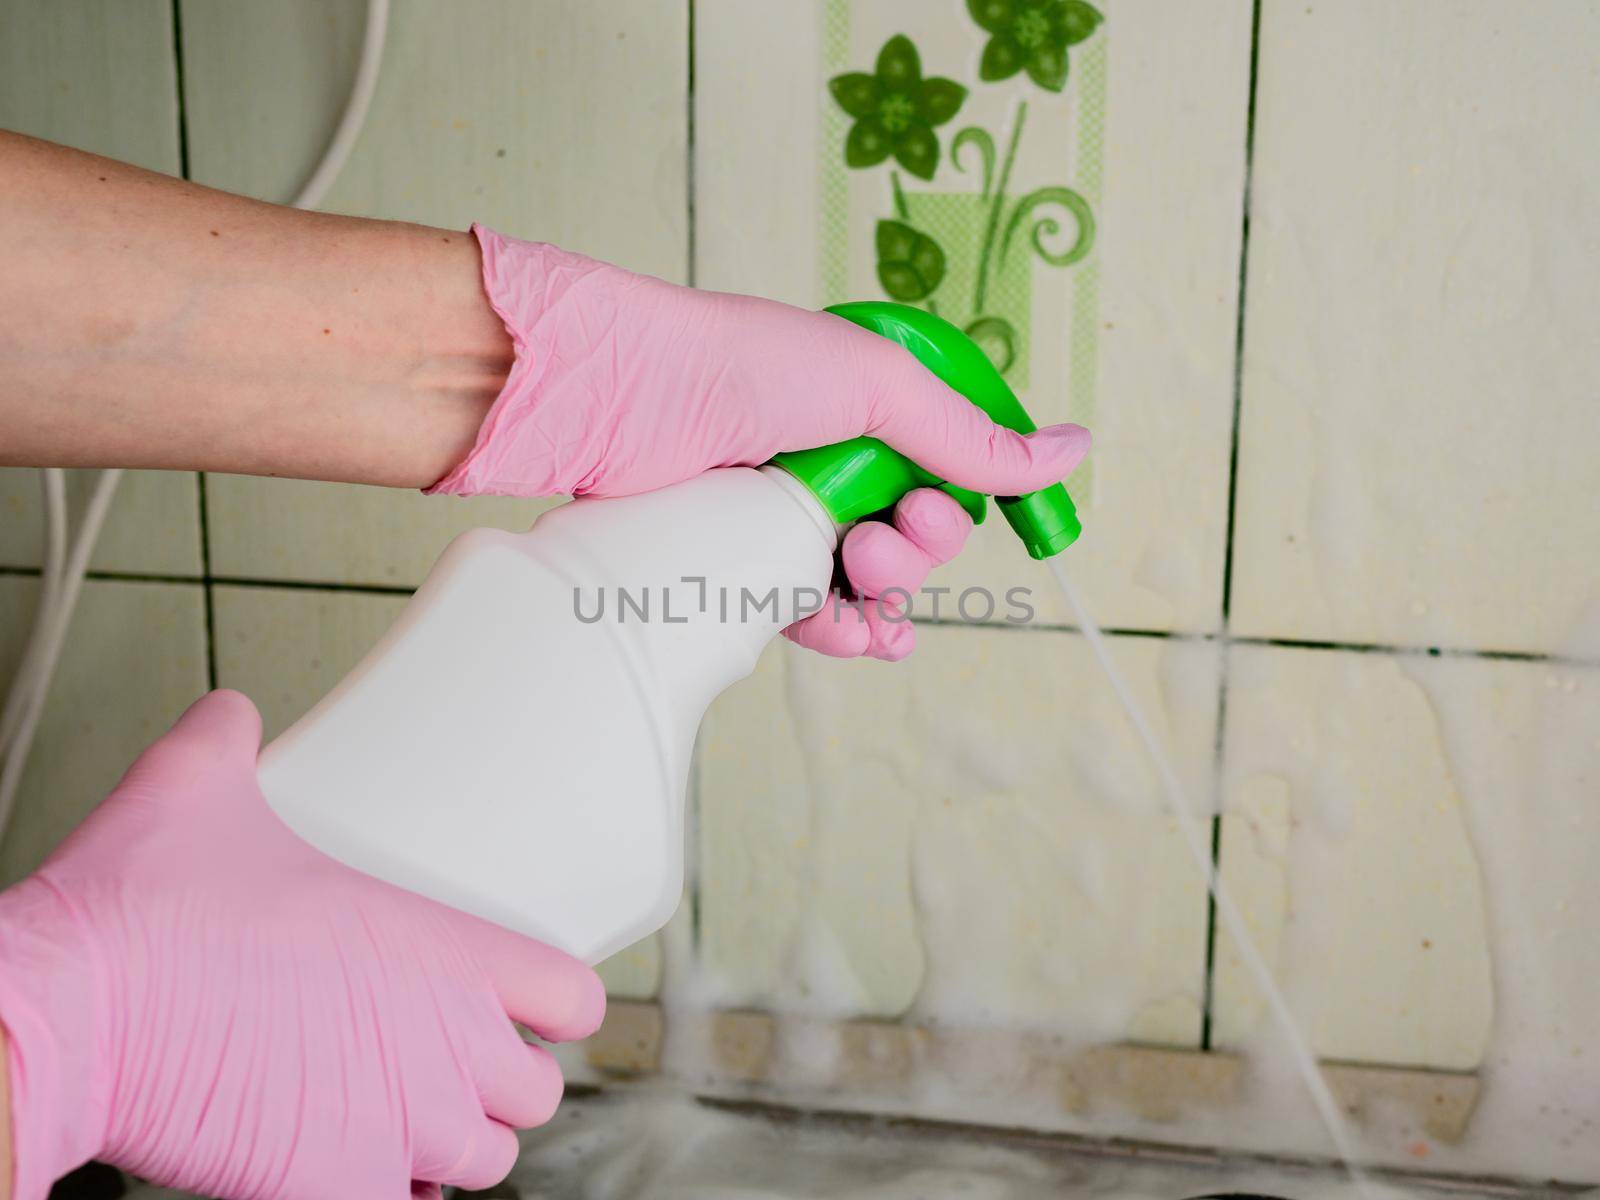 A woman in pink gloves sprays detergent on the tile above the gas stove to dissolve the fat and wash the dirty surface. by Utlanov